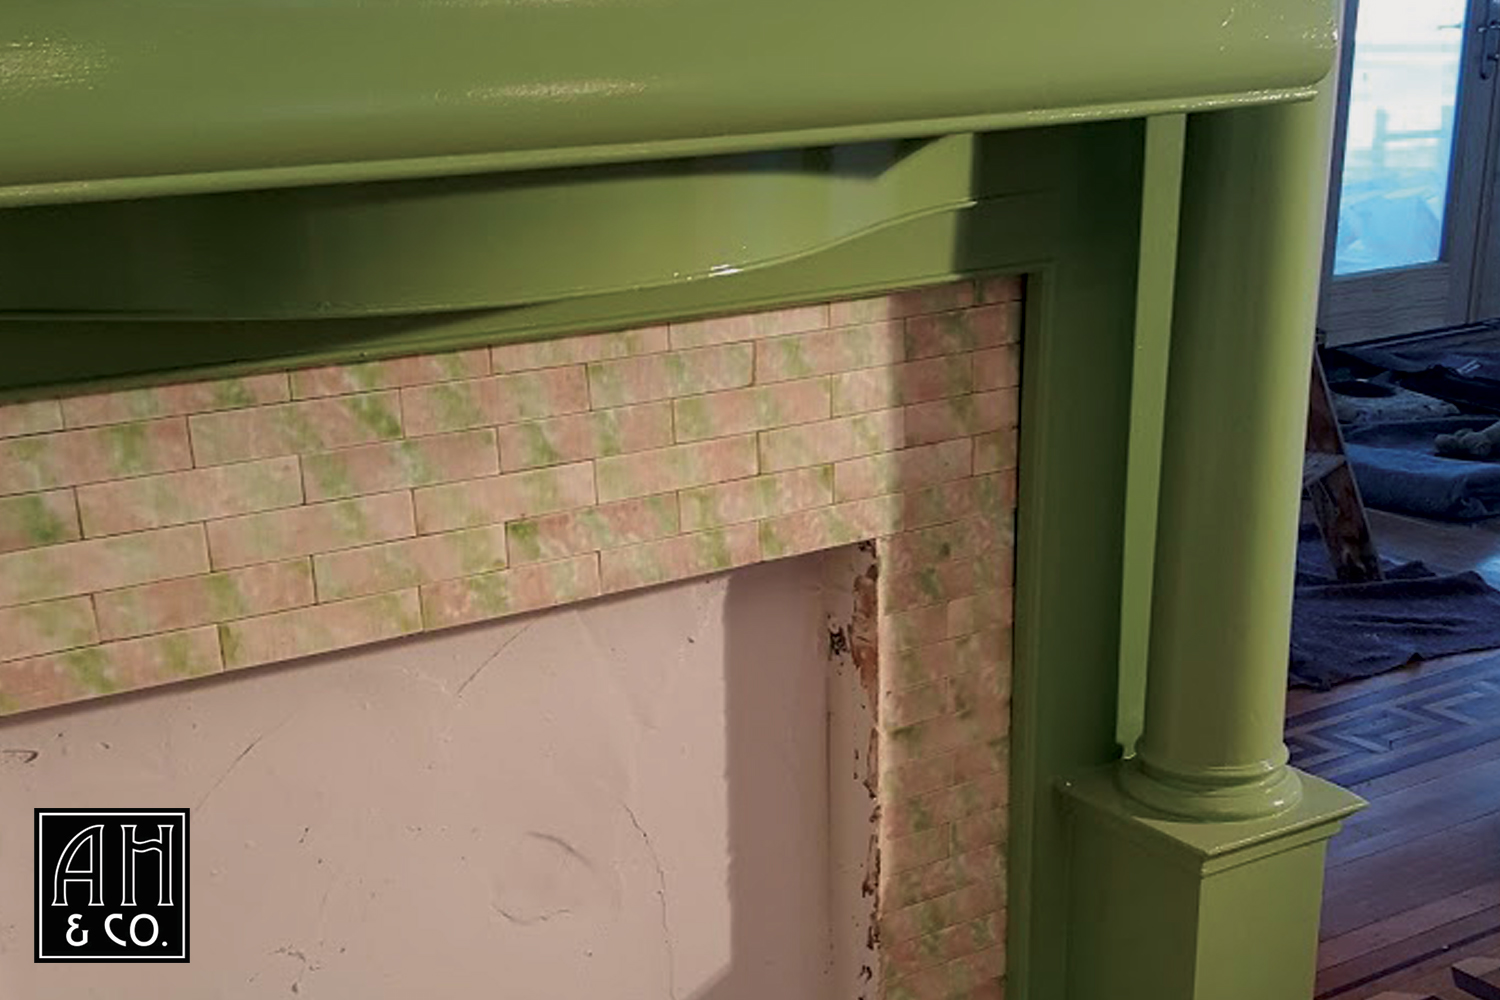 ORIGINAL TILE DETAIL USED TO COORDINATE THE CUSTOM MIXED GLOSS GREEN ENAMEL FINISH